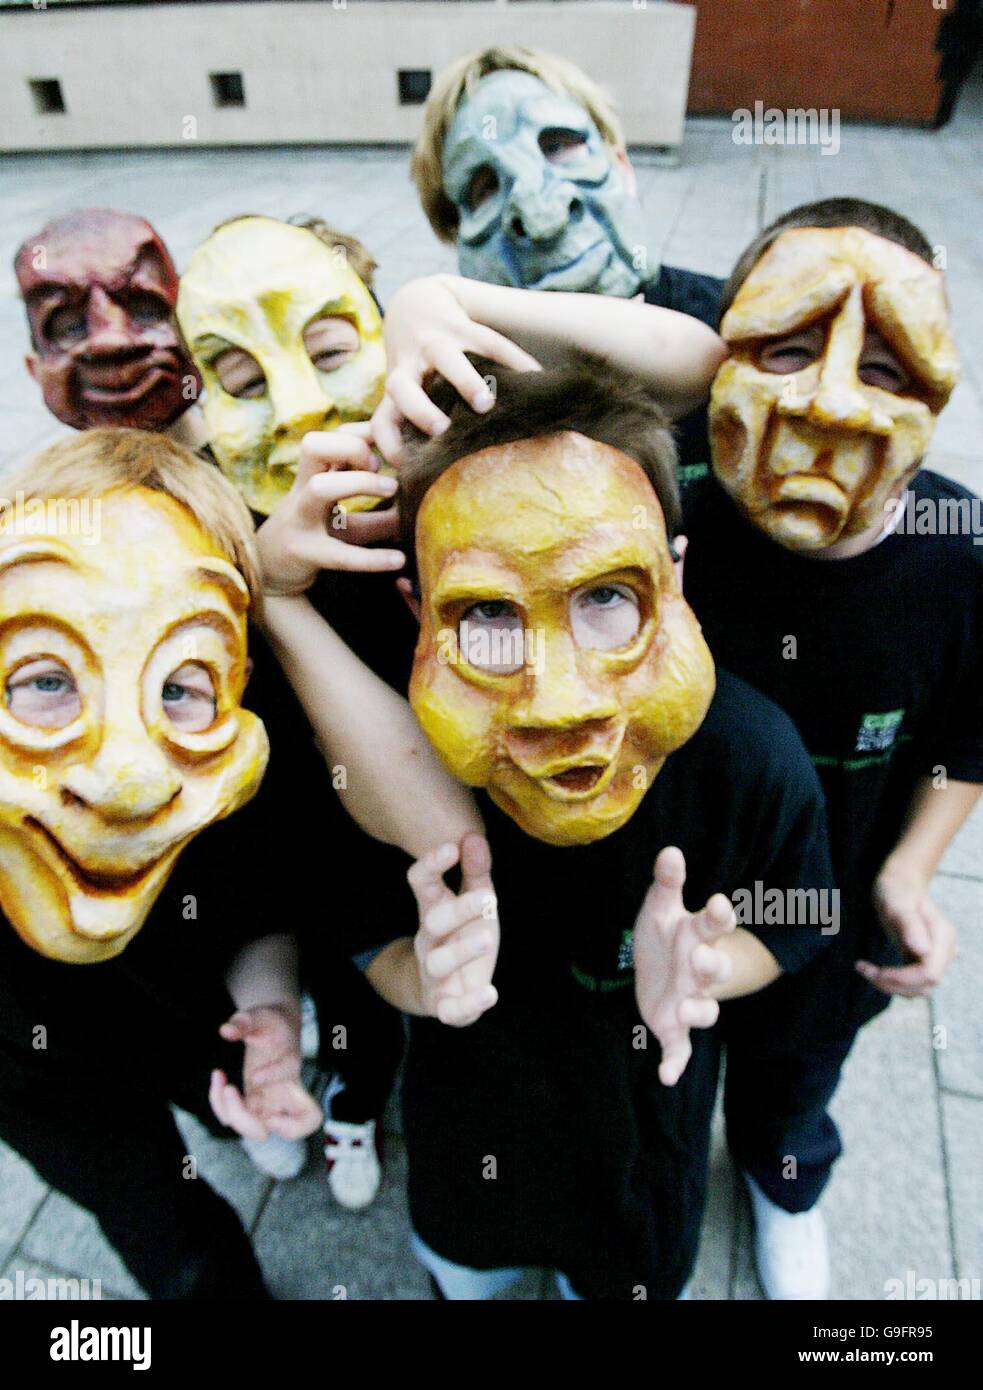 Members of the Gaiety school of acting at the launch of Dublin's first ever culture night at the Temple Bar Information centre in the city. PRESS ASSICIATION Photo. Picture date: Wednesday August 23, 2006. See PA story ARTS Culture Ireland. Photo credit should read: Niall Carson/PA Stock Photo